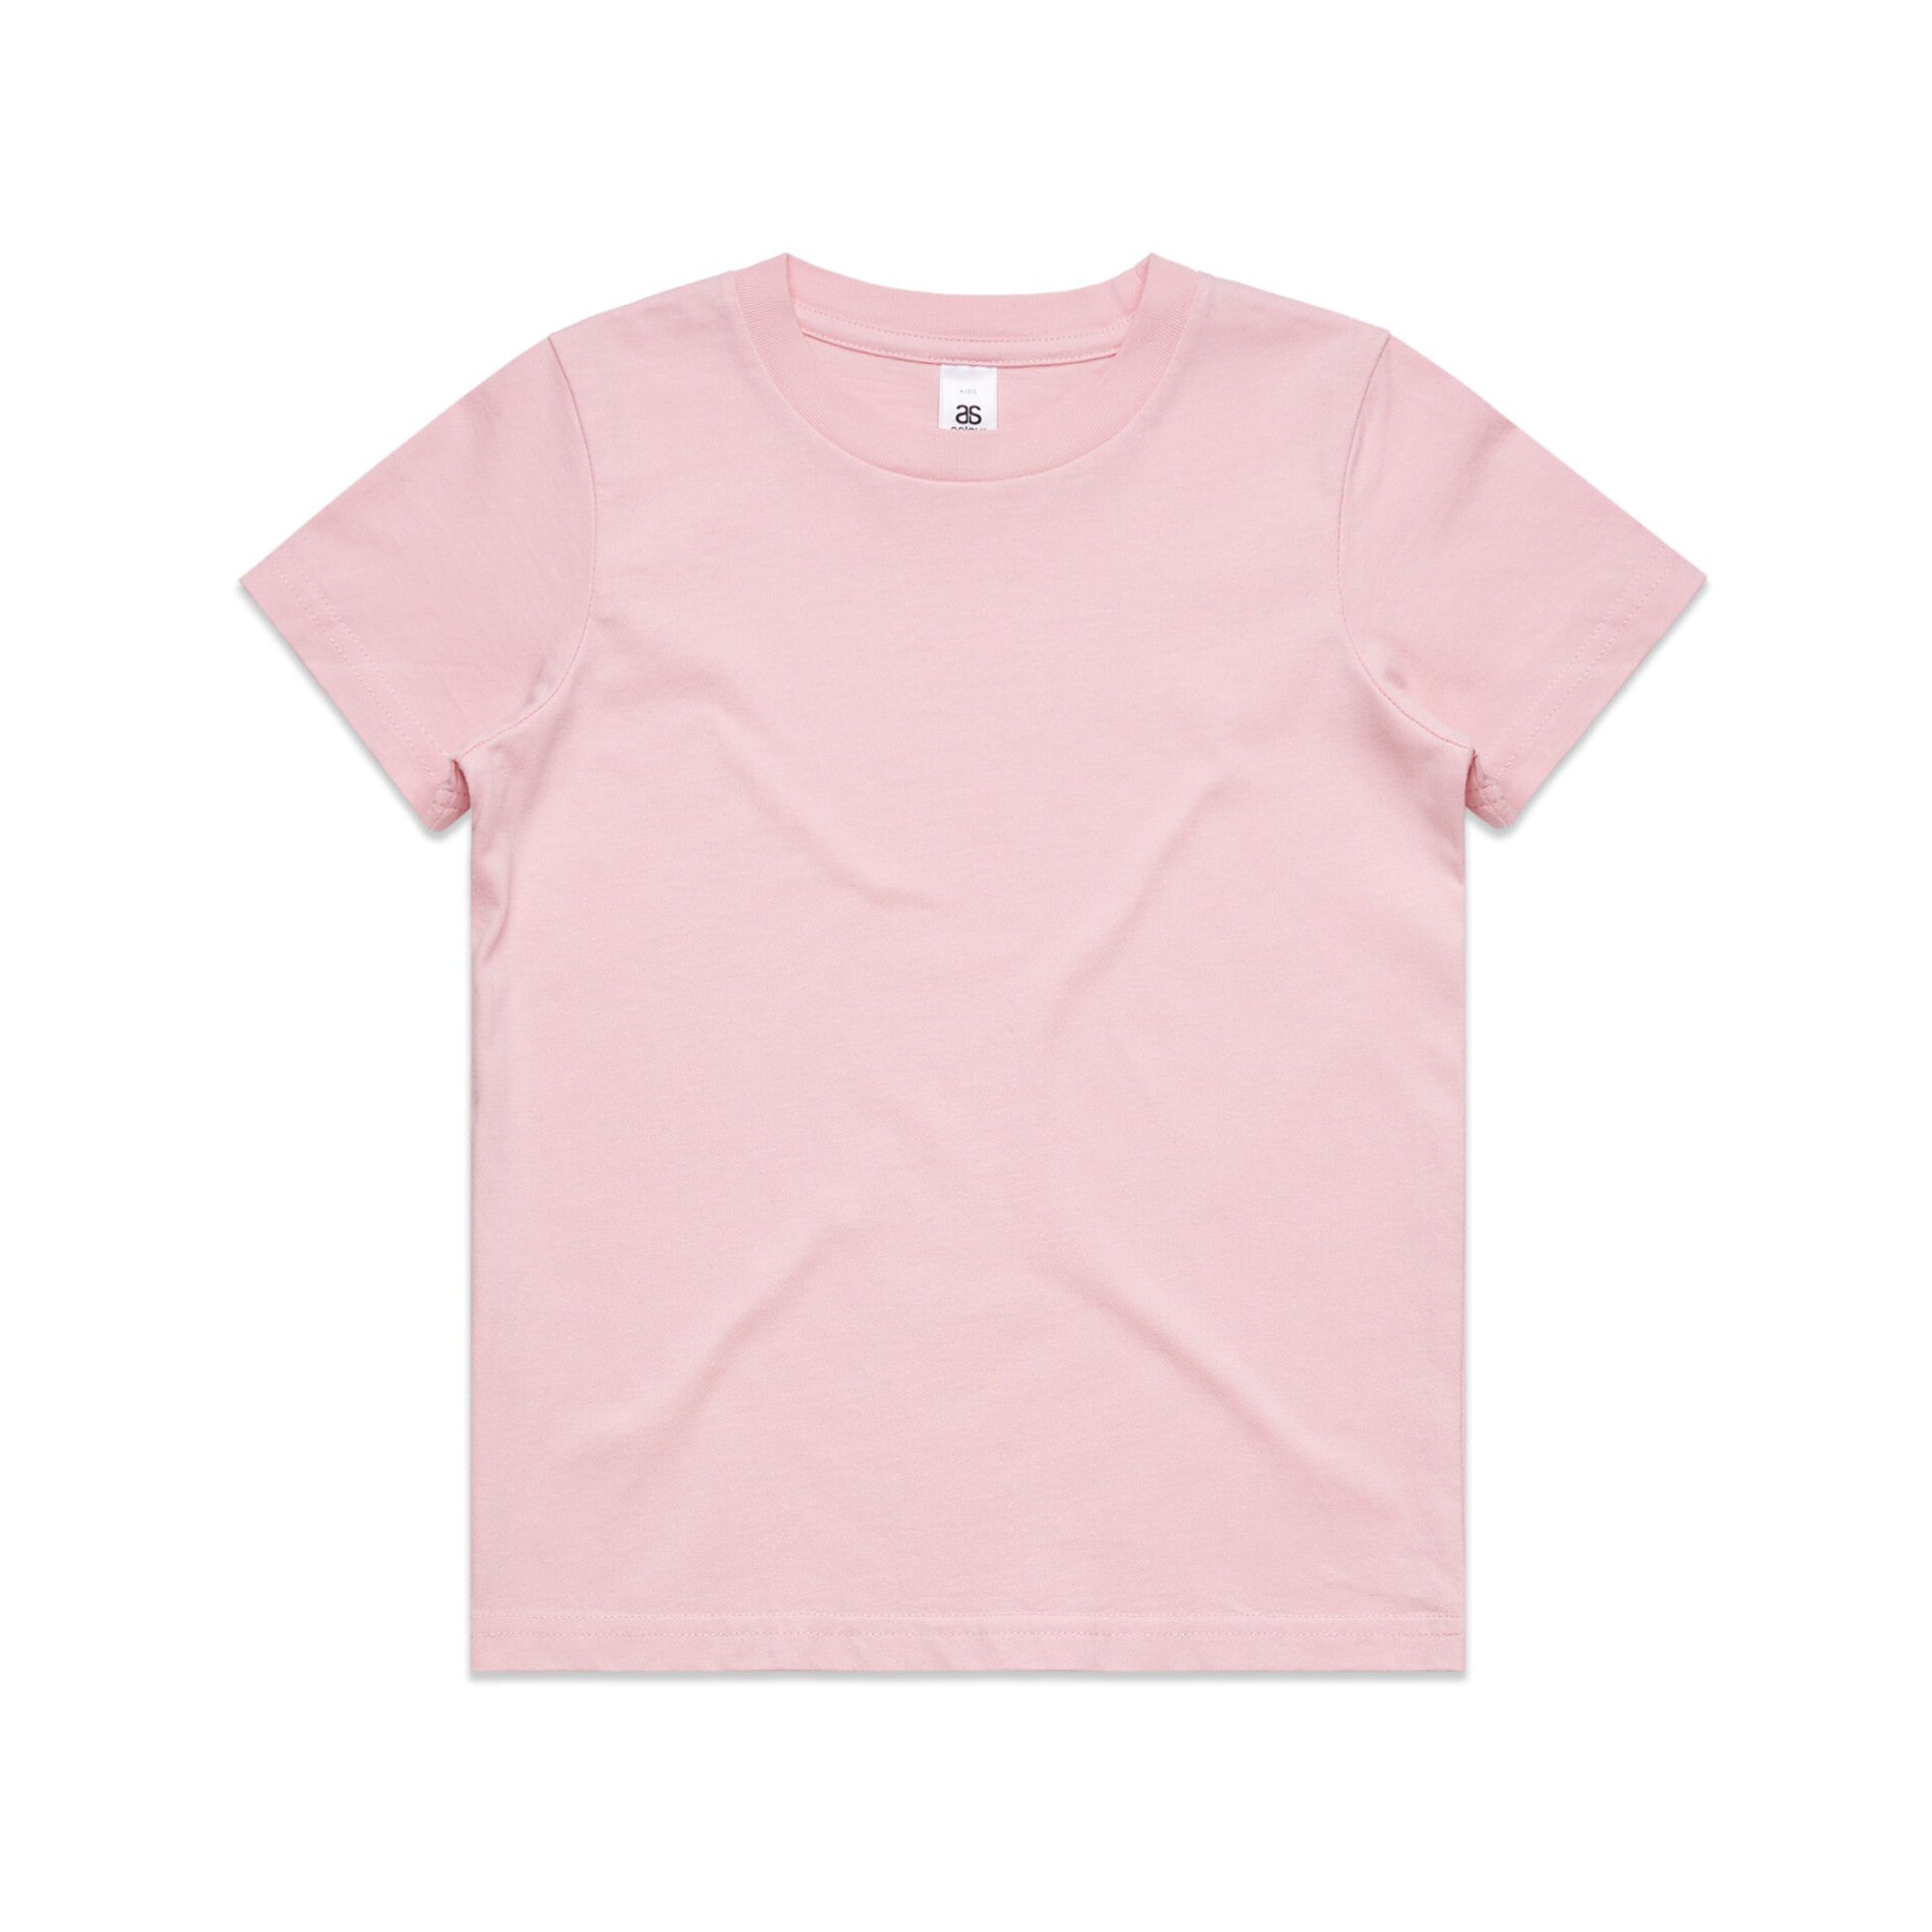 AS Colour Youth Staple Tee - 3006